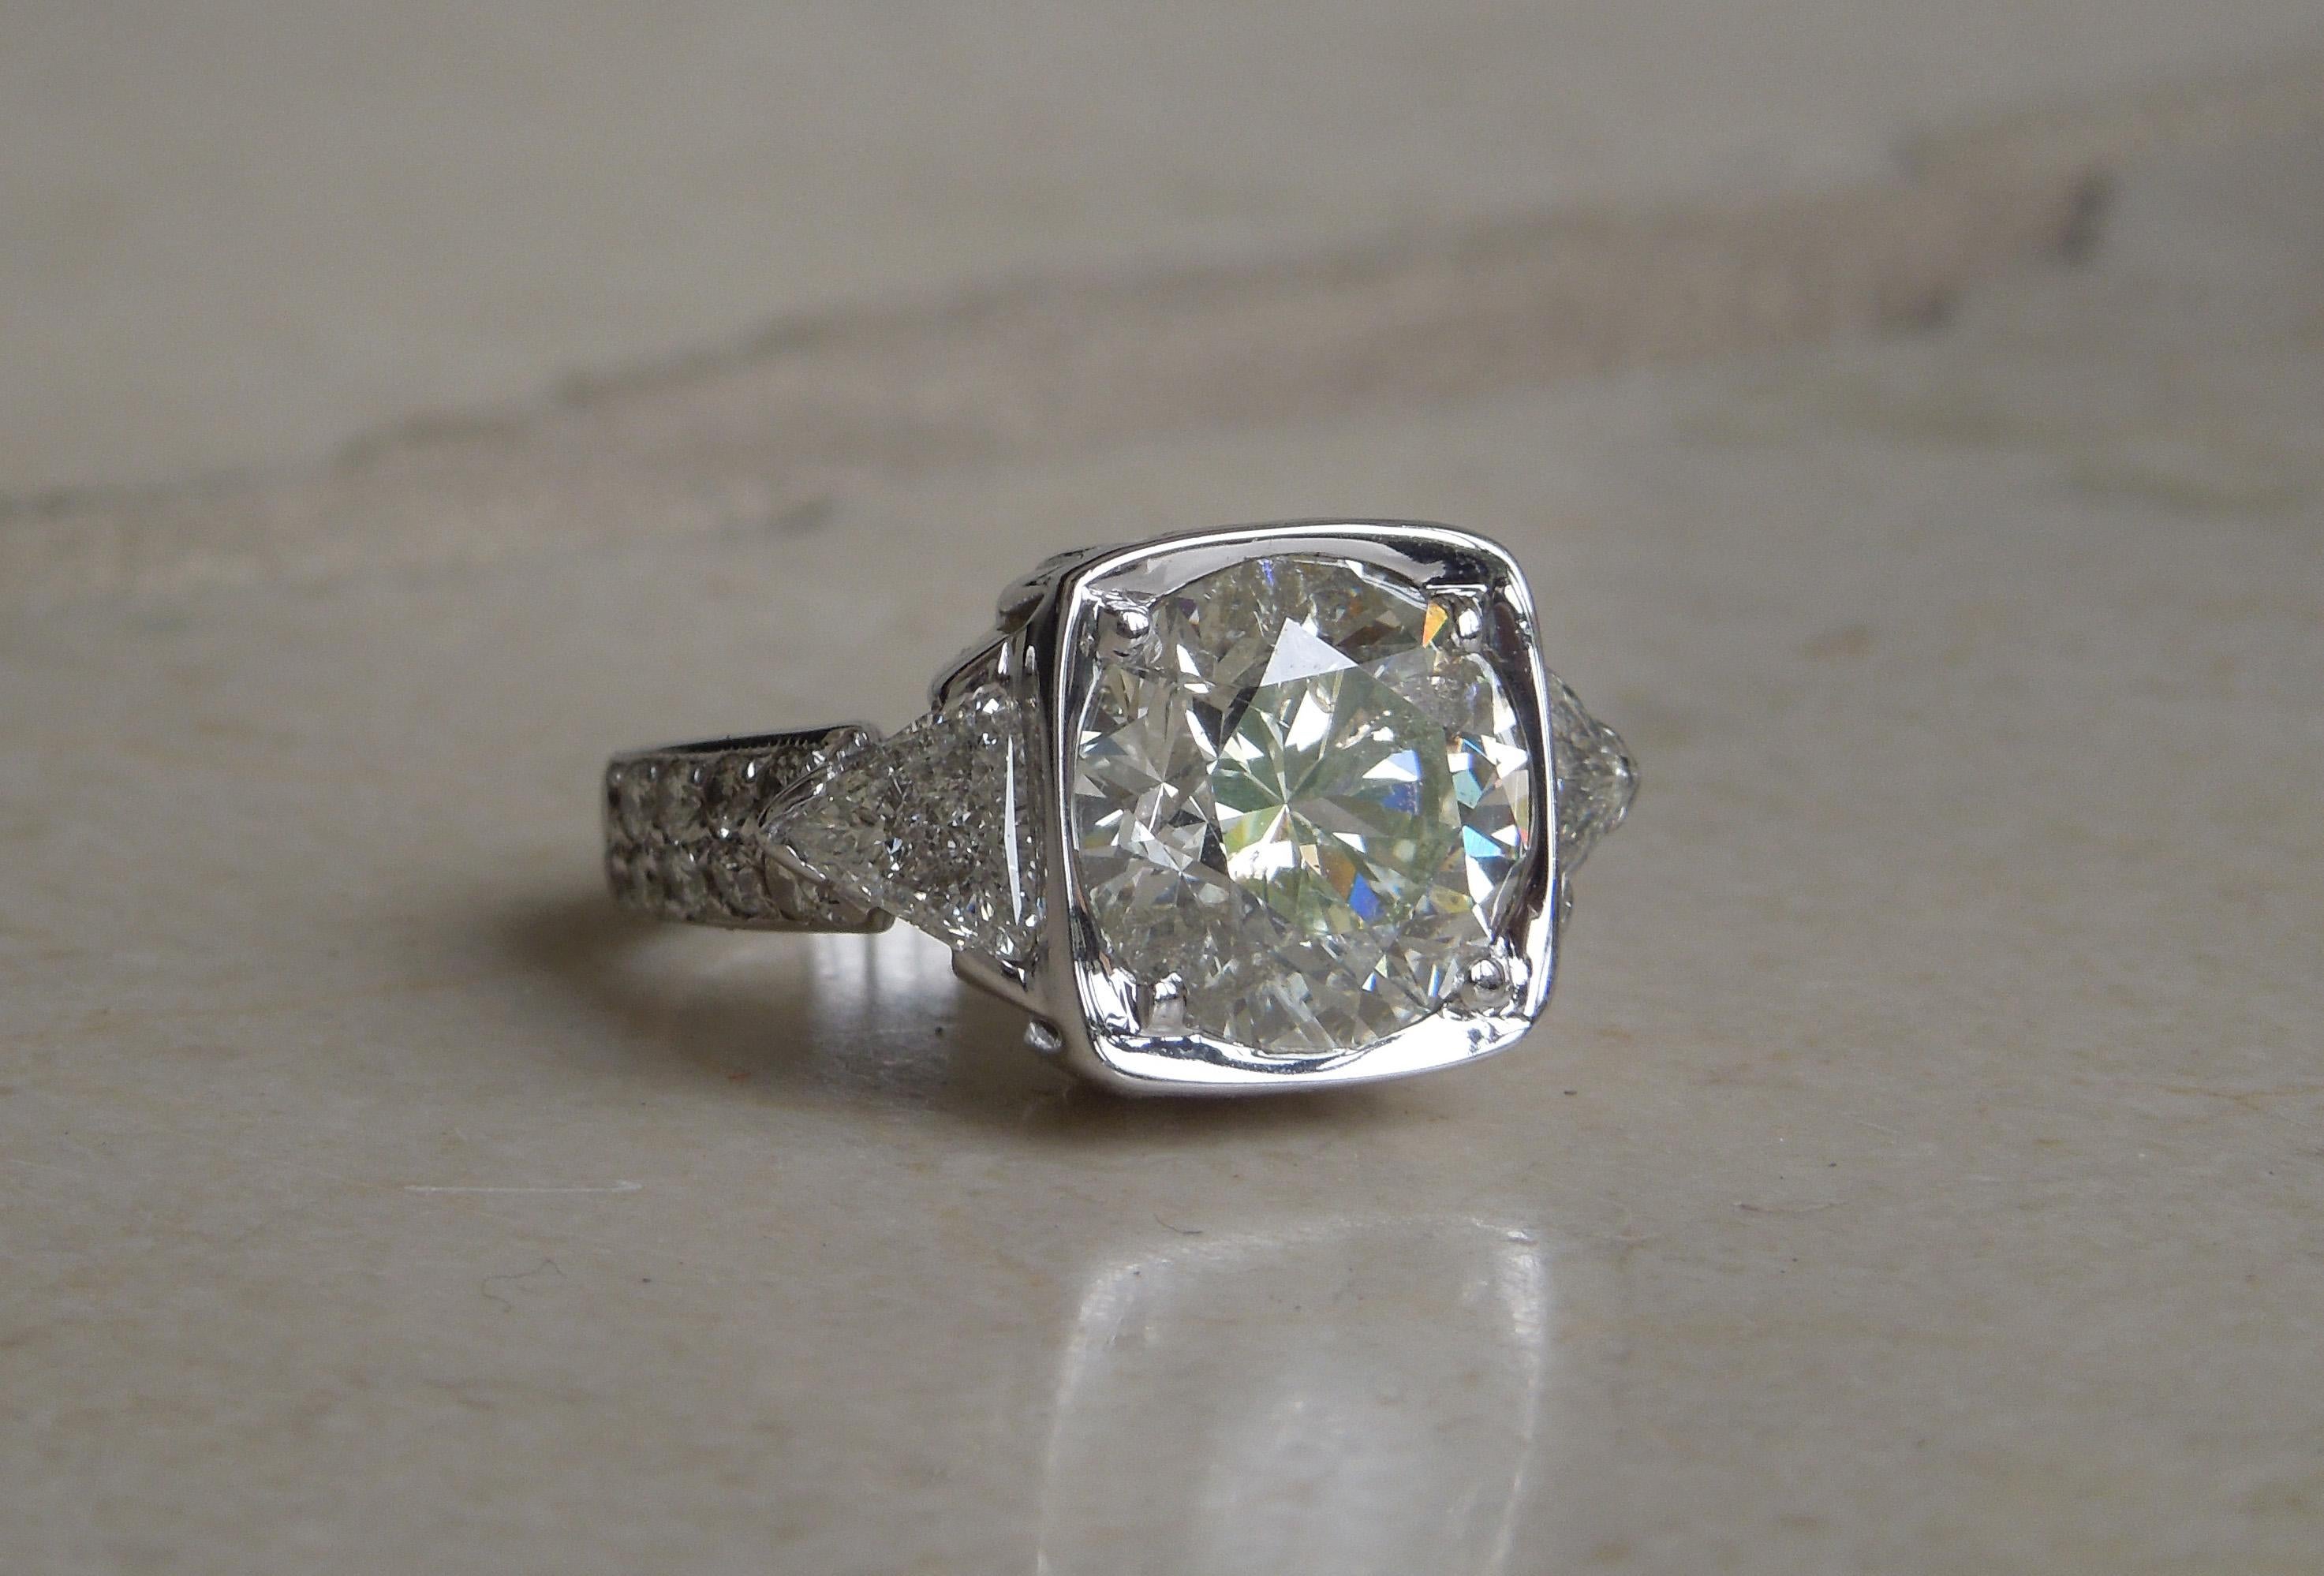 Featuring a central 5.10 carat Round Brilliant cut at 10.8mm in diameter ranking a J Color & I1 Clarity. Facing up extremely white for a J Color, as well as encased in a rounded square encasing creating the optical illusion of a 7 carat Solitaire.